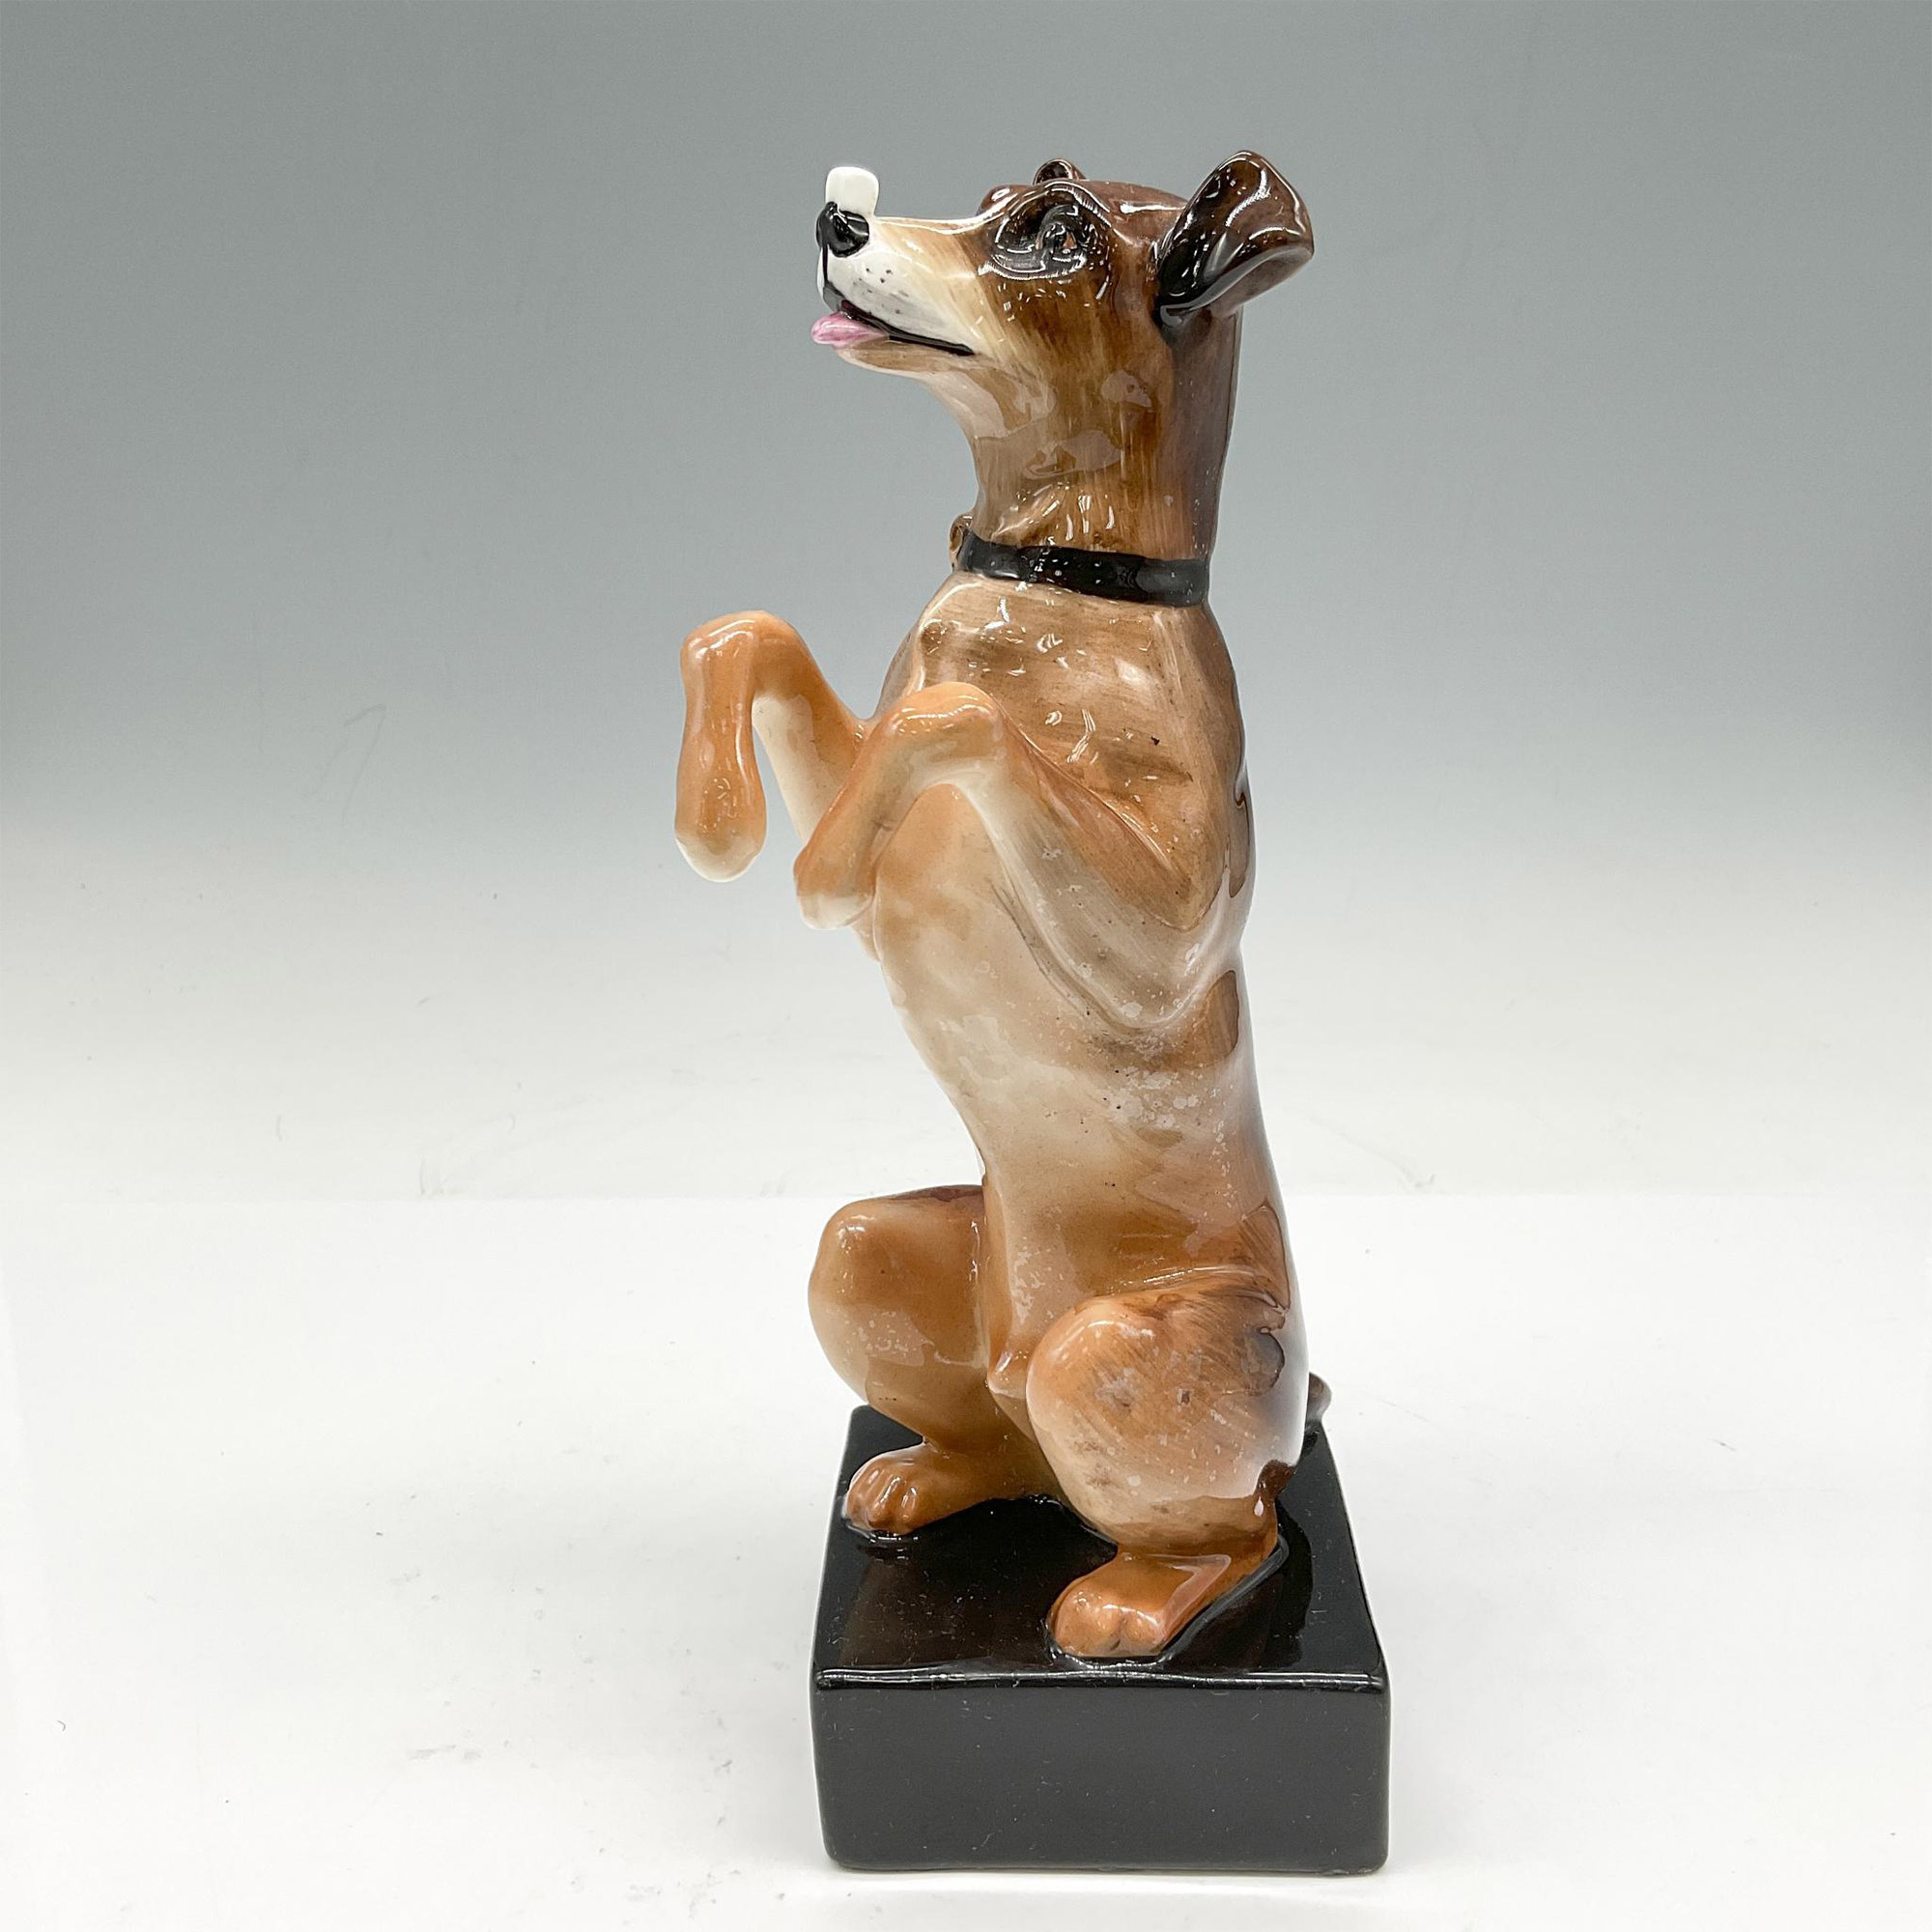 Dog with Cube on Nose - Royal Doulton Animal Figurine - Image 3 of 4